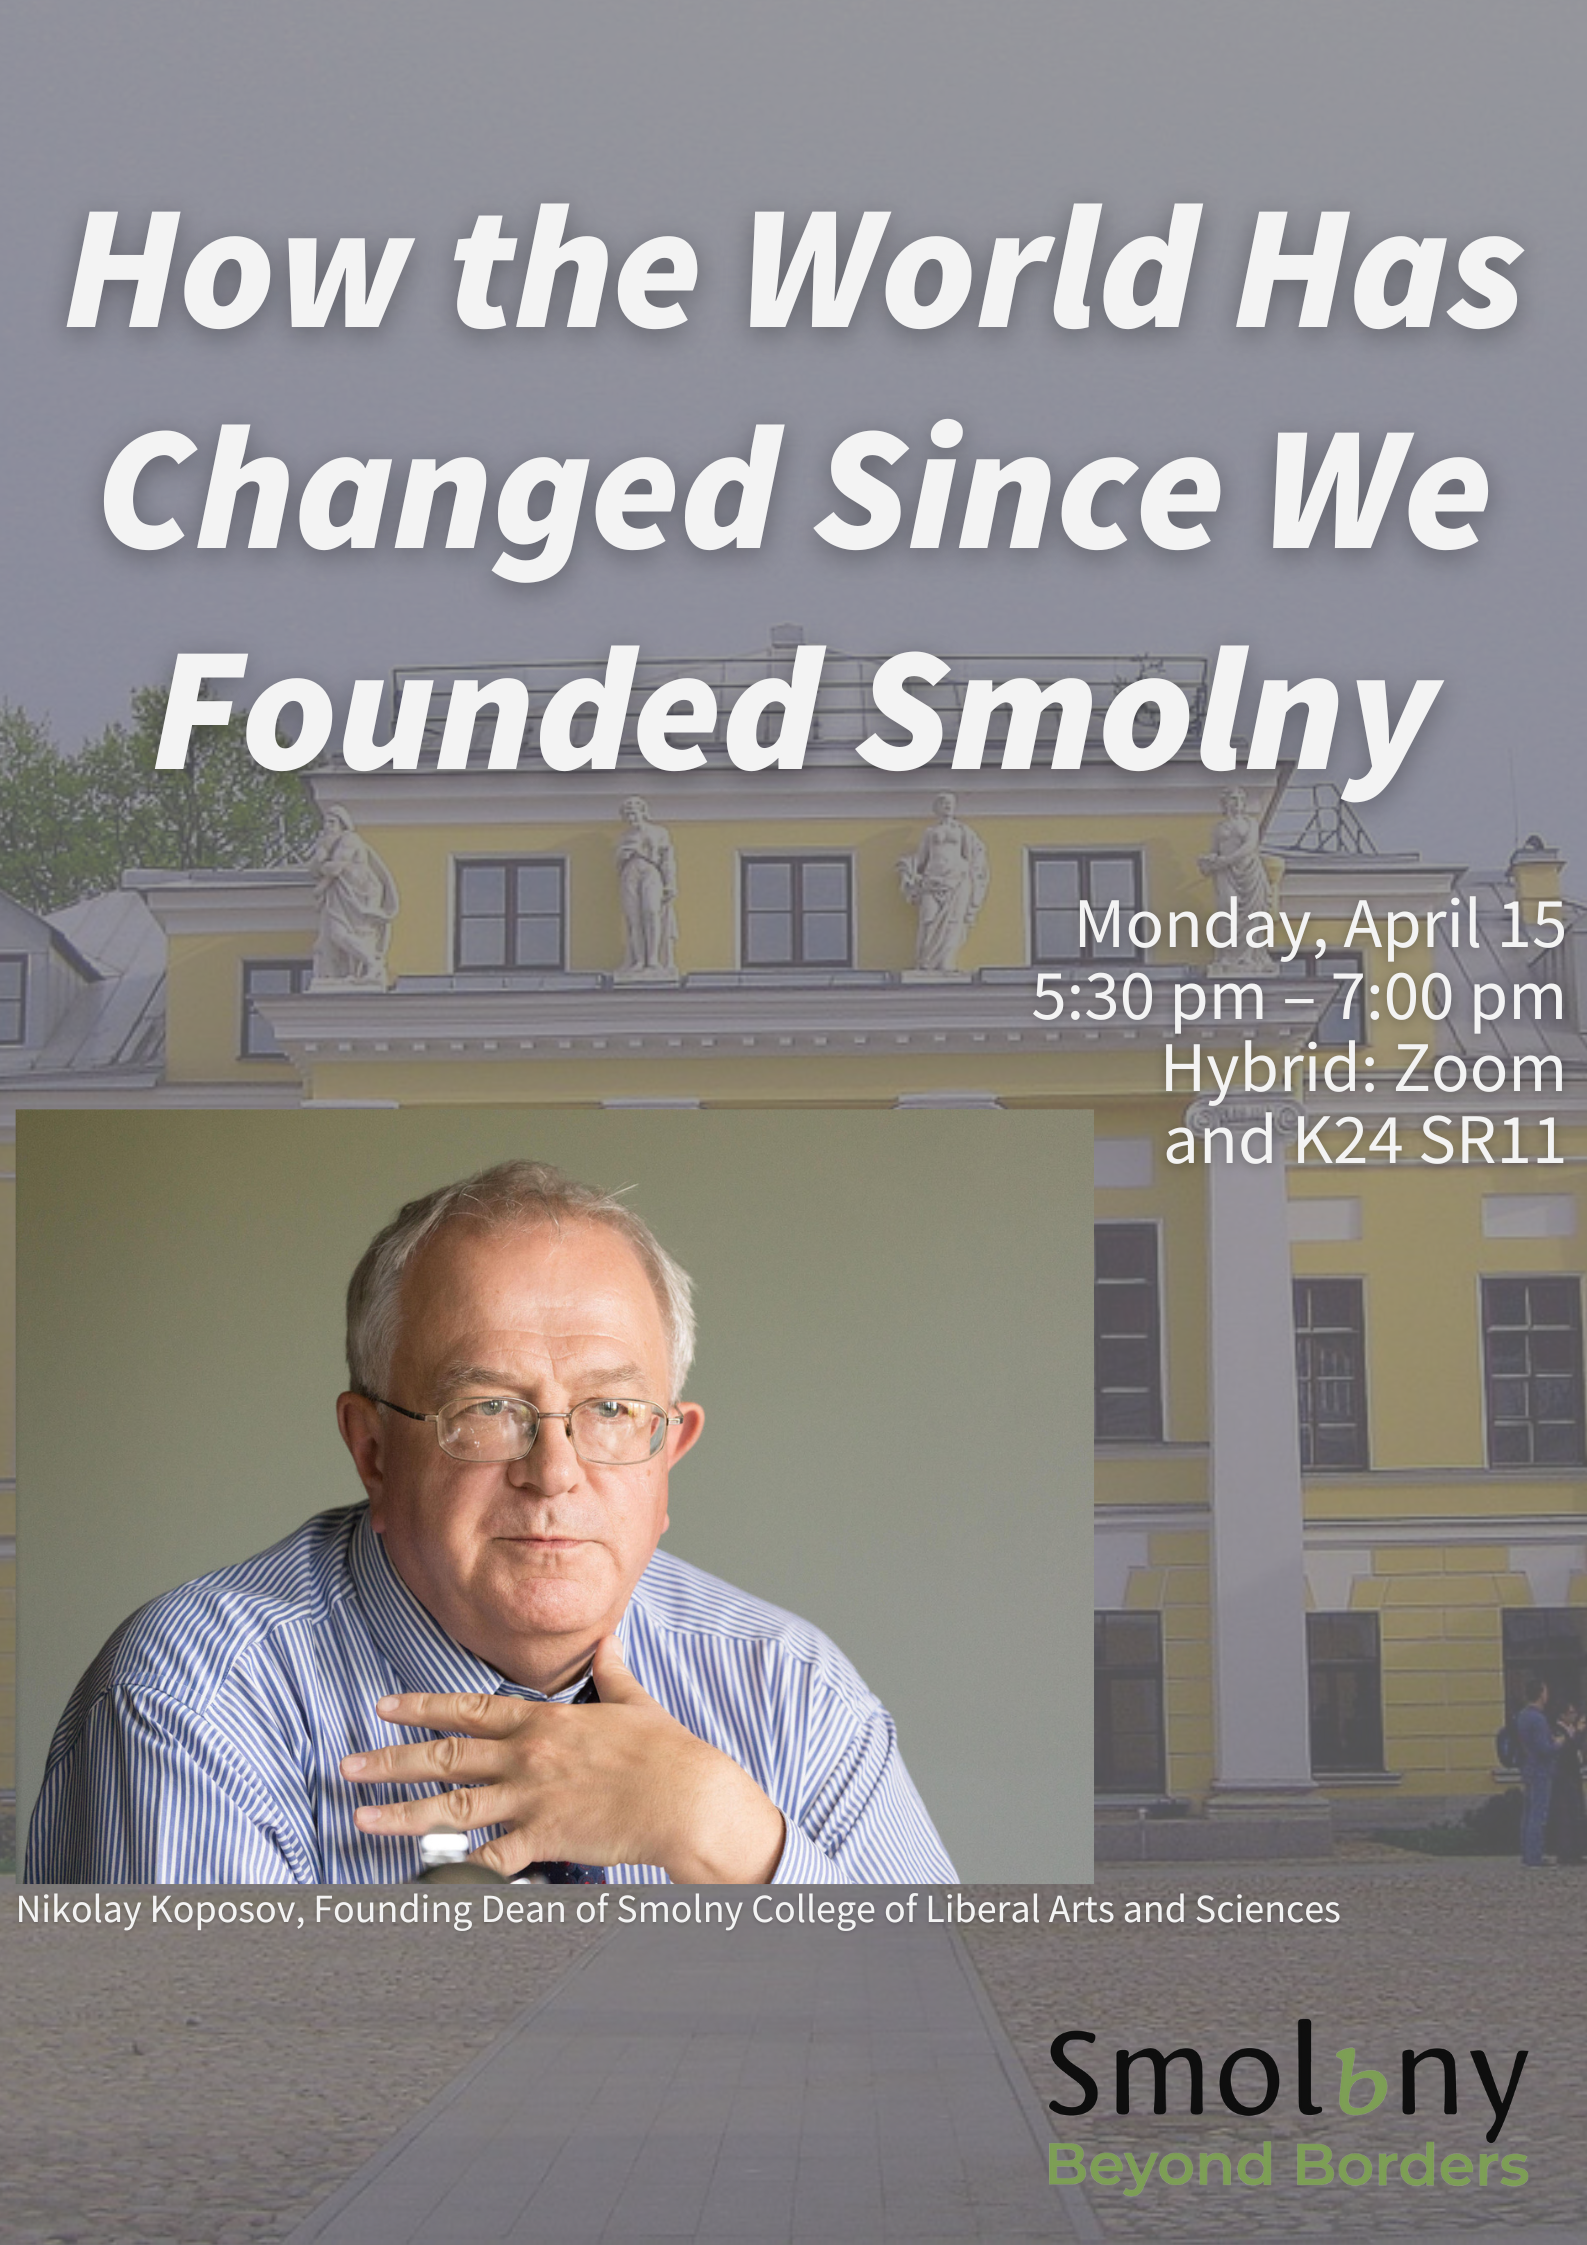 How the World Has Changed Since We Founded Smolny